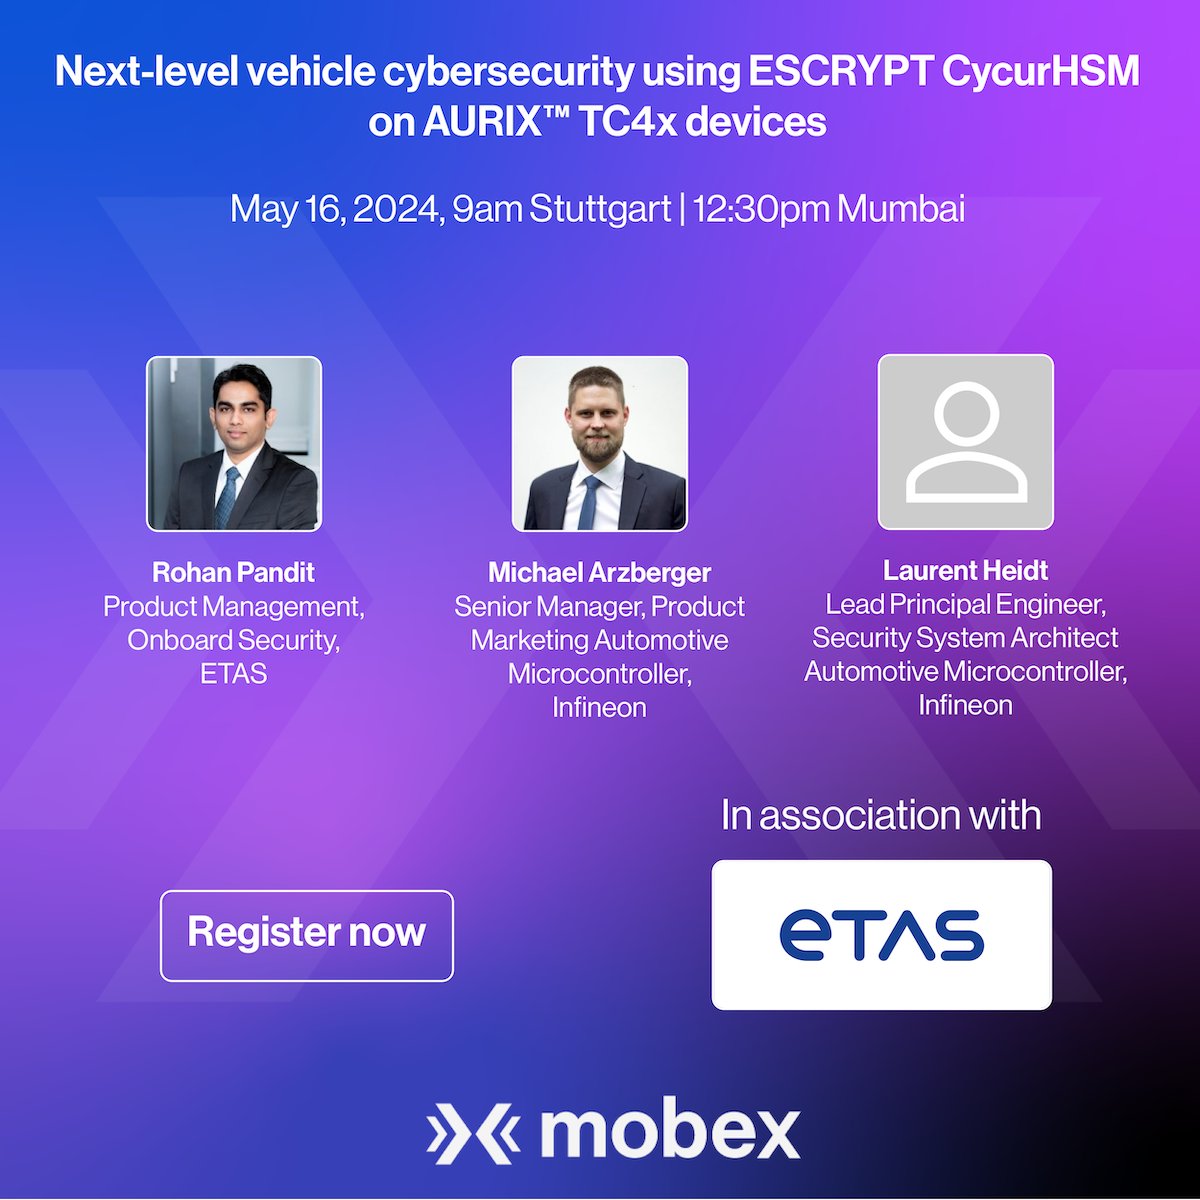 Live webinar: Next-level vehicle cybersecurity using ESCRYPT CycurHSM on AURIX™ TC4x devices by ETAS and Infineon. May 16, 2024, 9am Stuttgart | 12:30pm Mumbai. Register free: bit.ly/3UEO3Cq